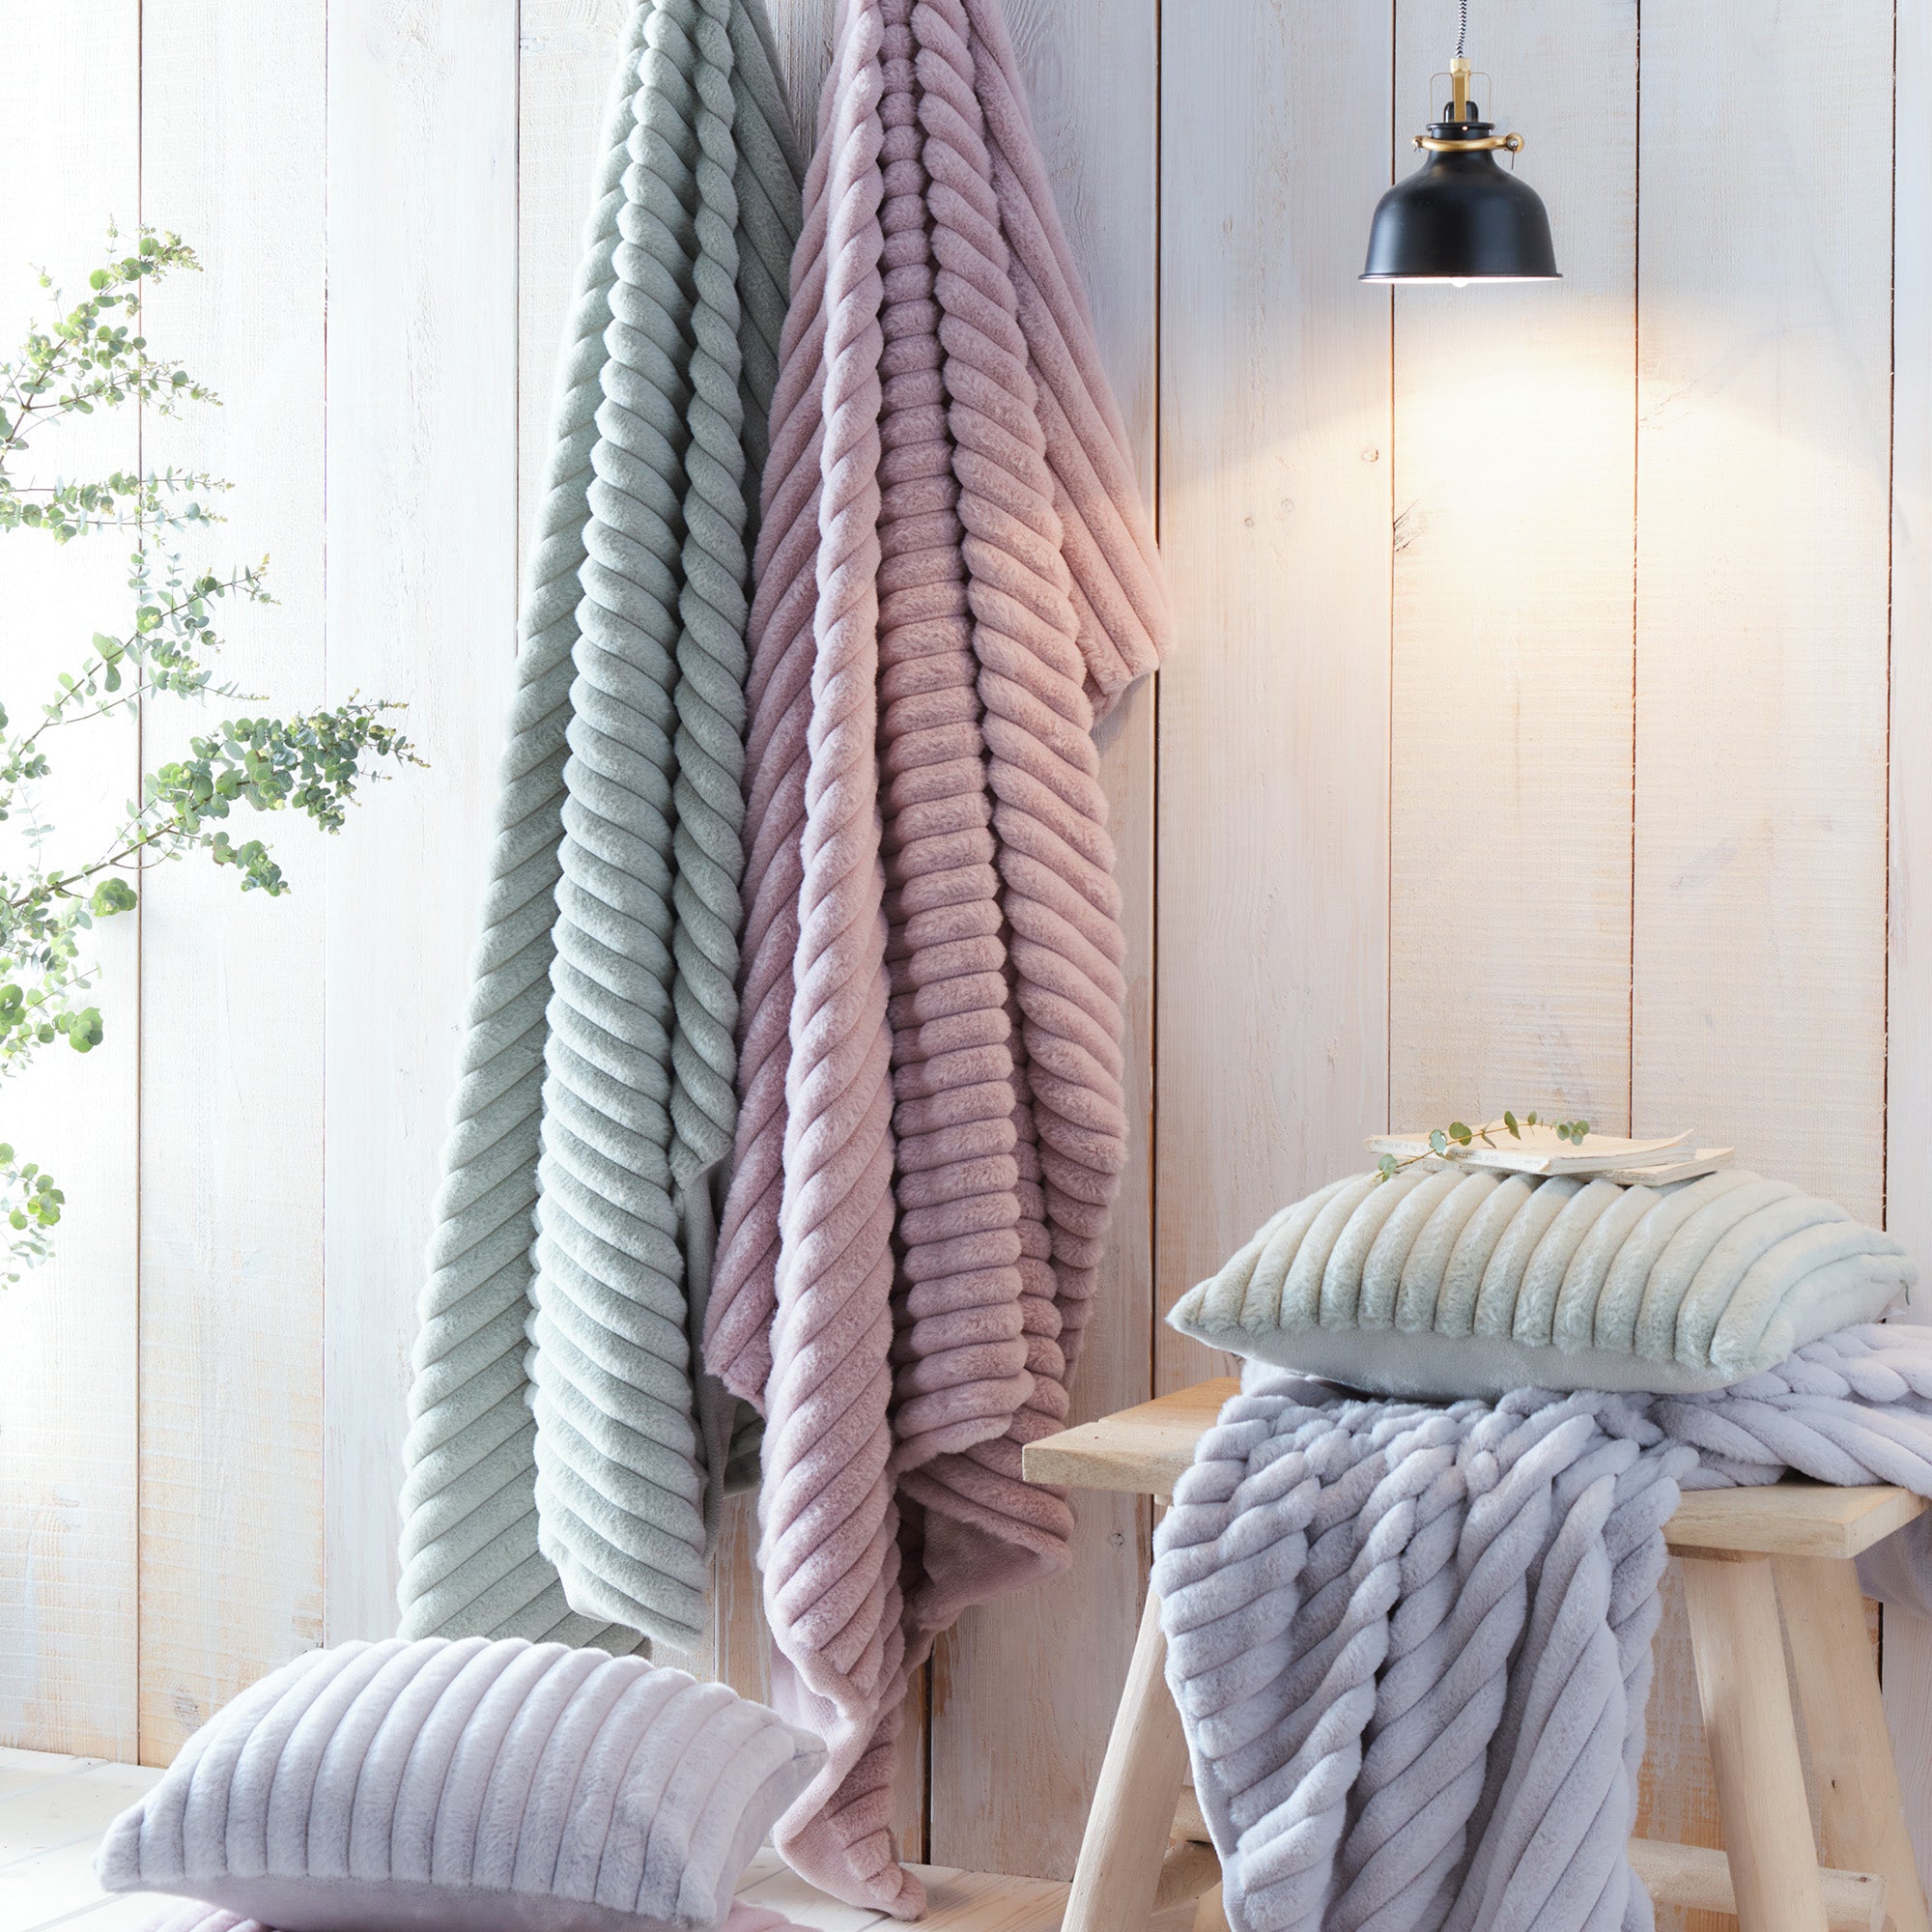 Throw Morritz by Appletree Hygge in Mauve